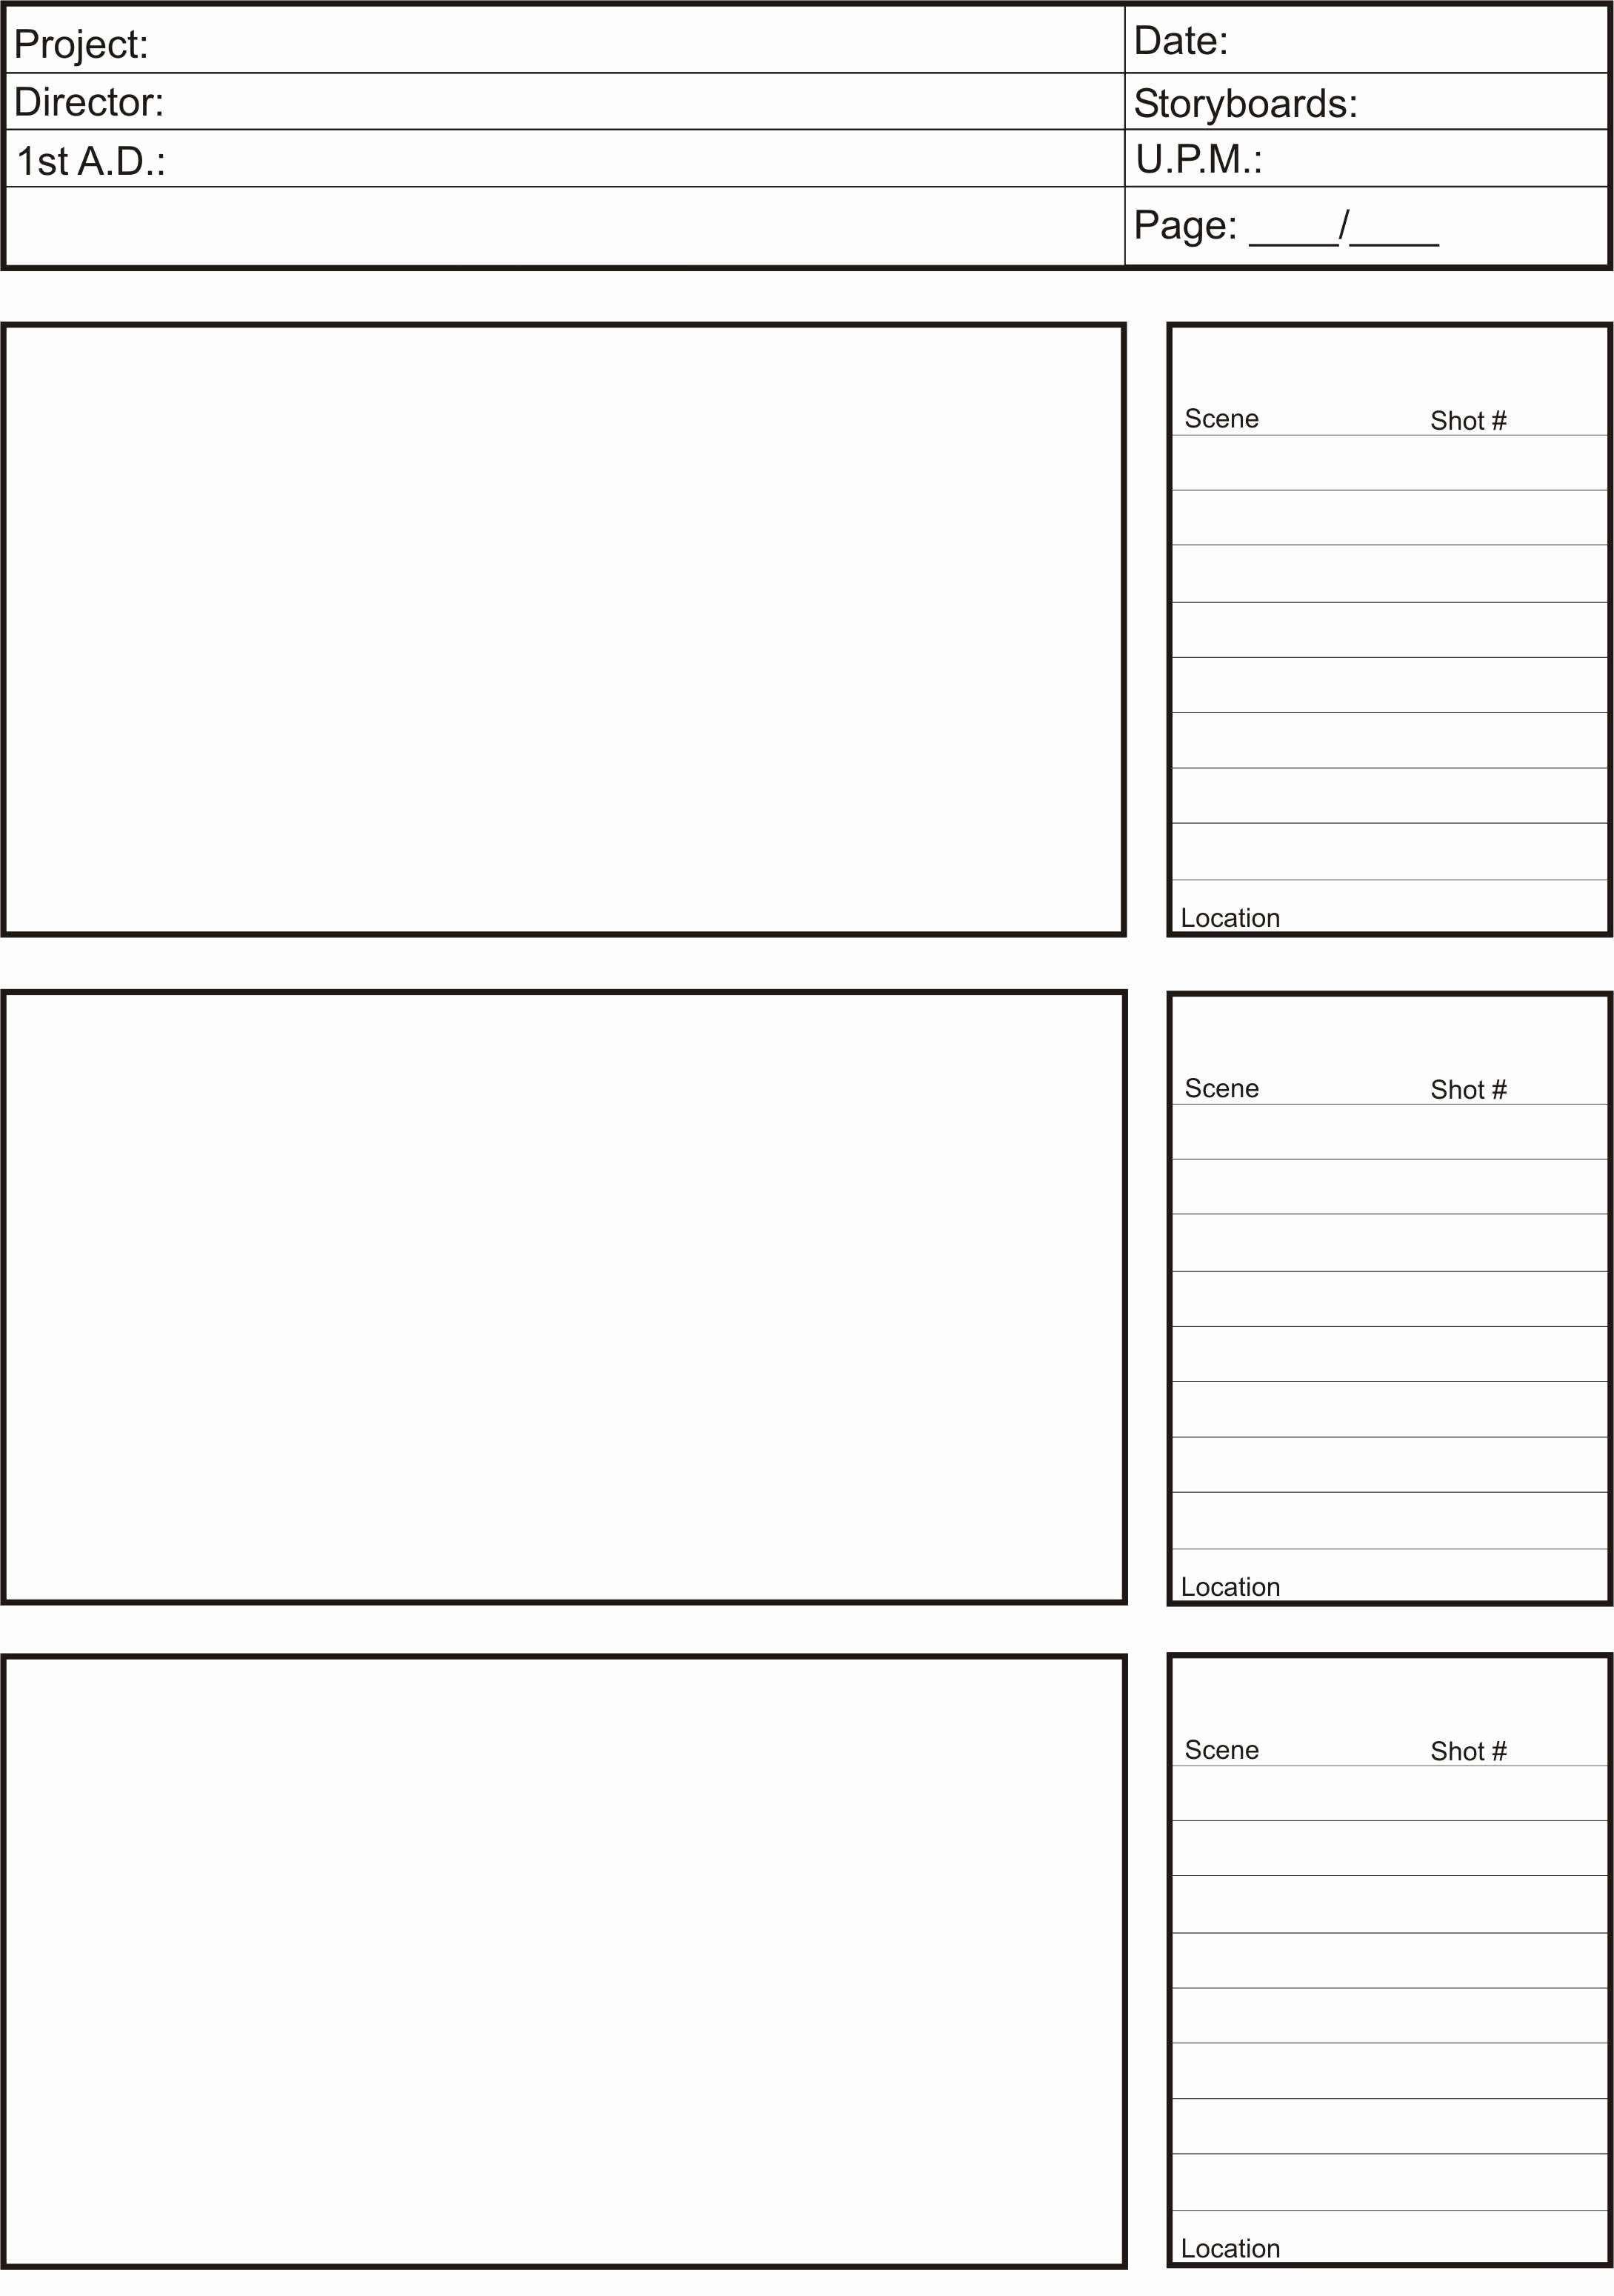 Professional Film Storyboard Template Awesome Animation Storyboard Template Google Search